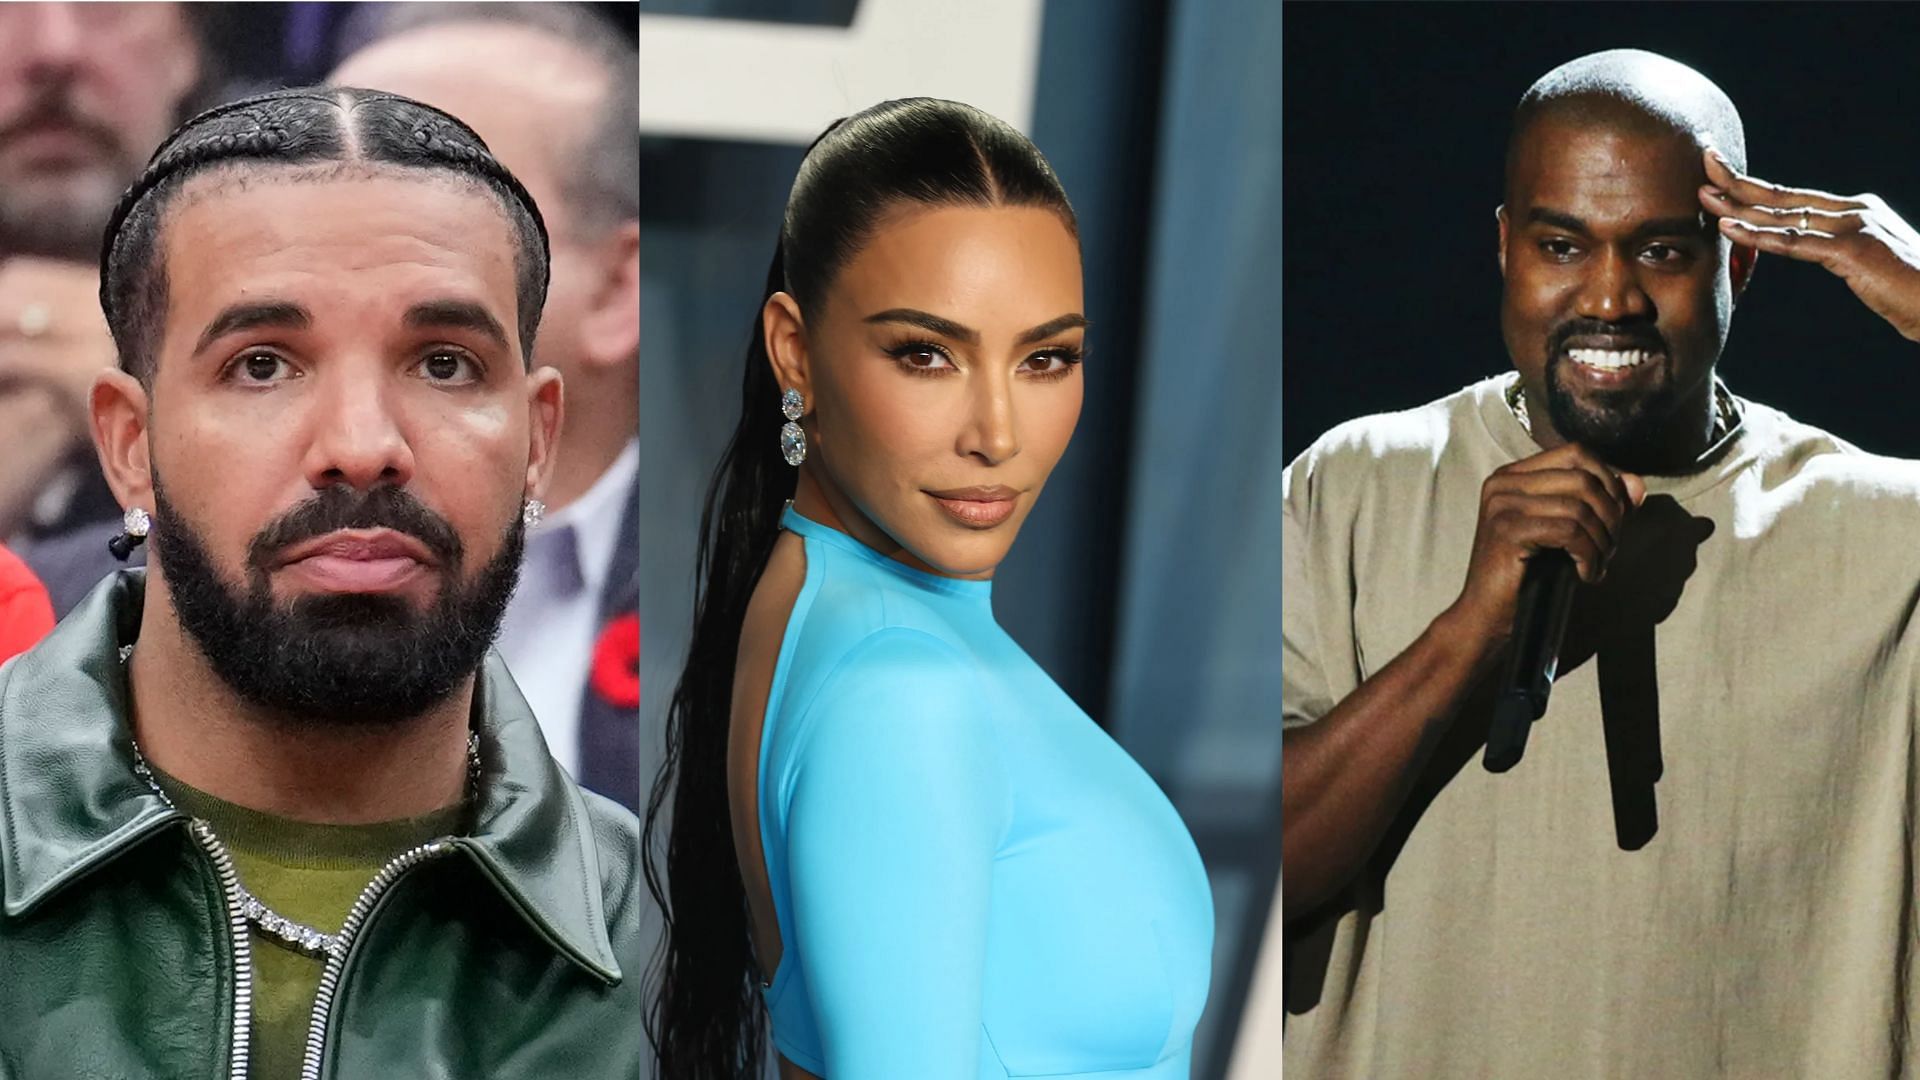 Drake, Kim and Kanye. (Photo via Mark Blinch/Getty Images, Arturo Holmes/Getty Images, Michael Tran/Getty Images)